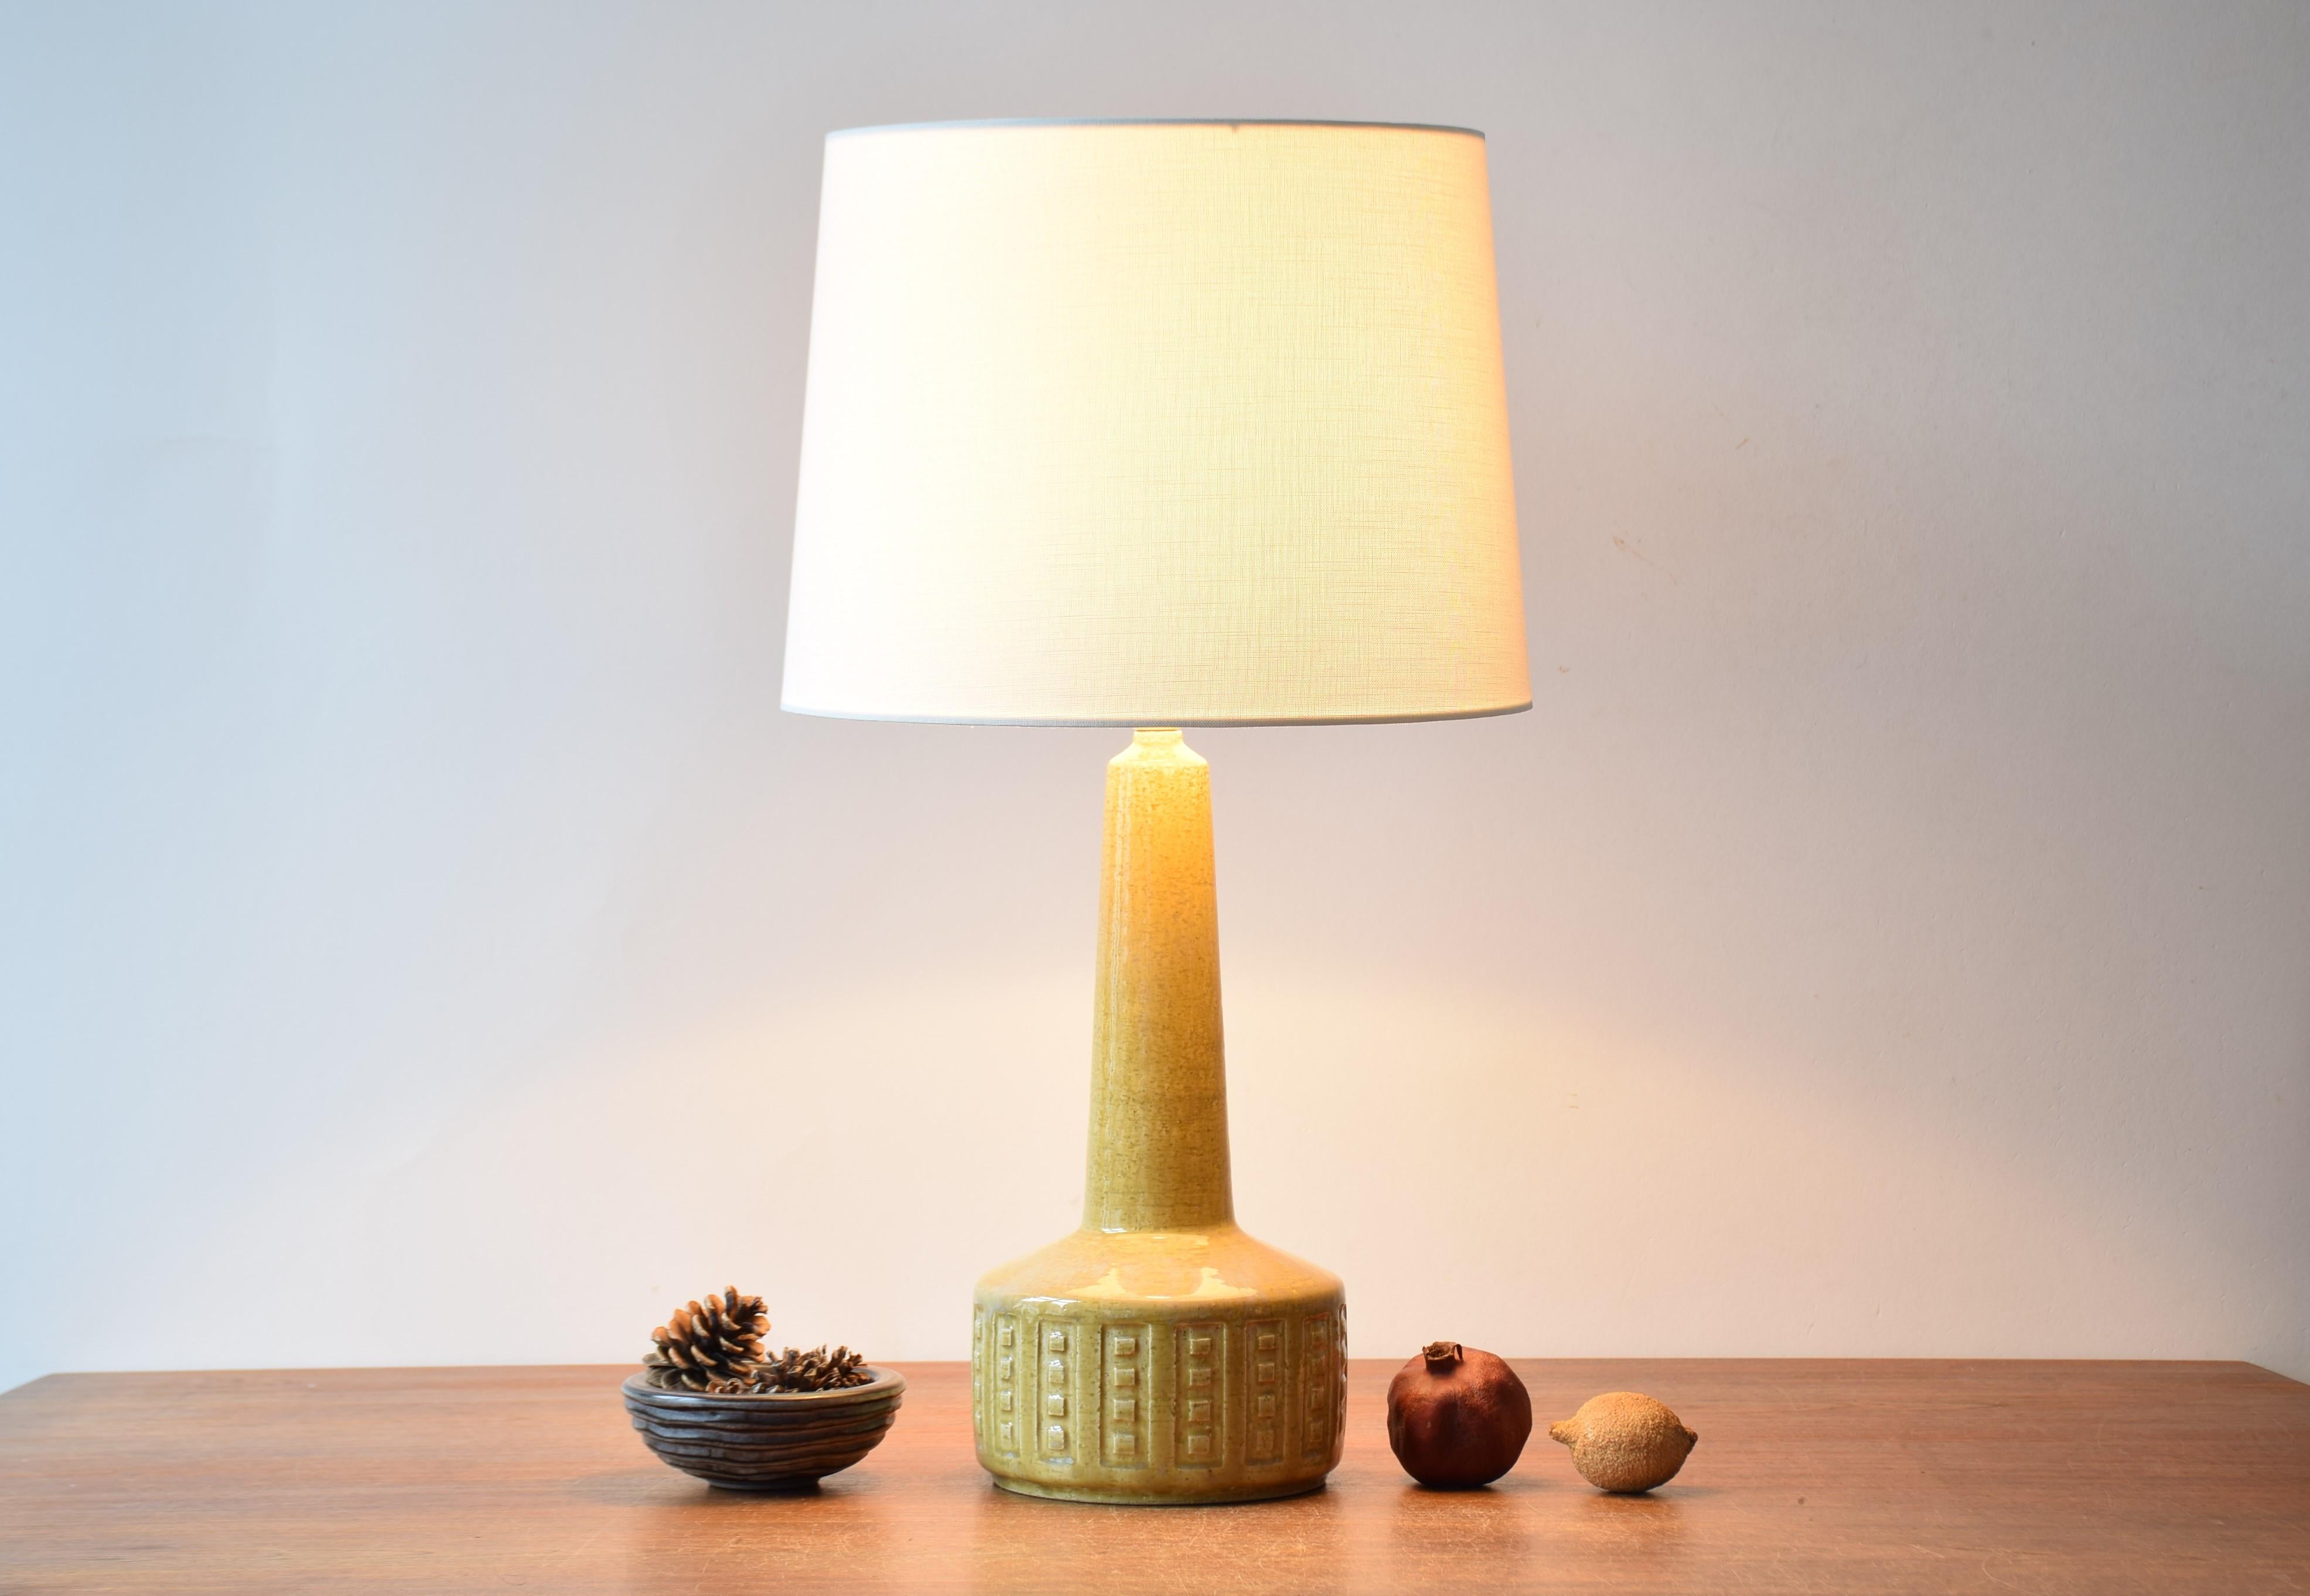 Tall midcentury Danish table lamp from Palshus.
The lamp was designed by Per Linnemann-Schmidt and manufactured circa 1960 or early 1970s.
It is made with chamotte clay which gives a rough and vivid surface. The glaze is yellow with pale blue